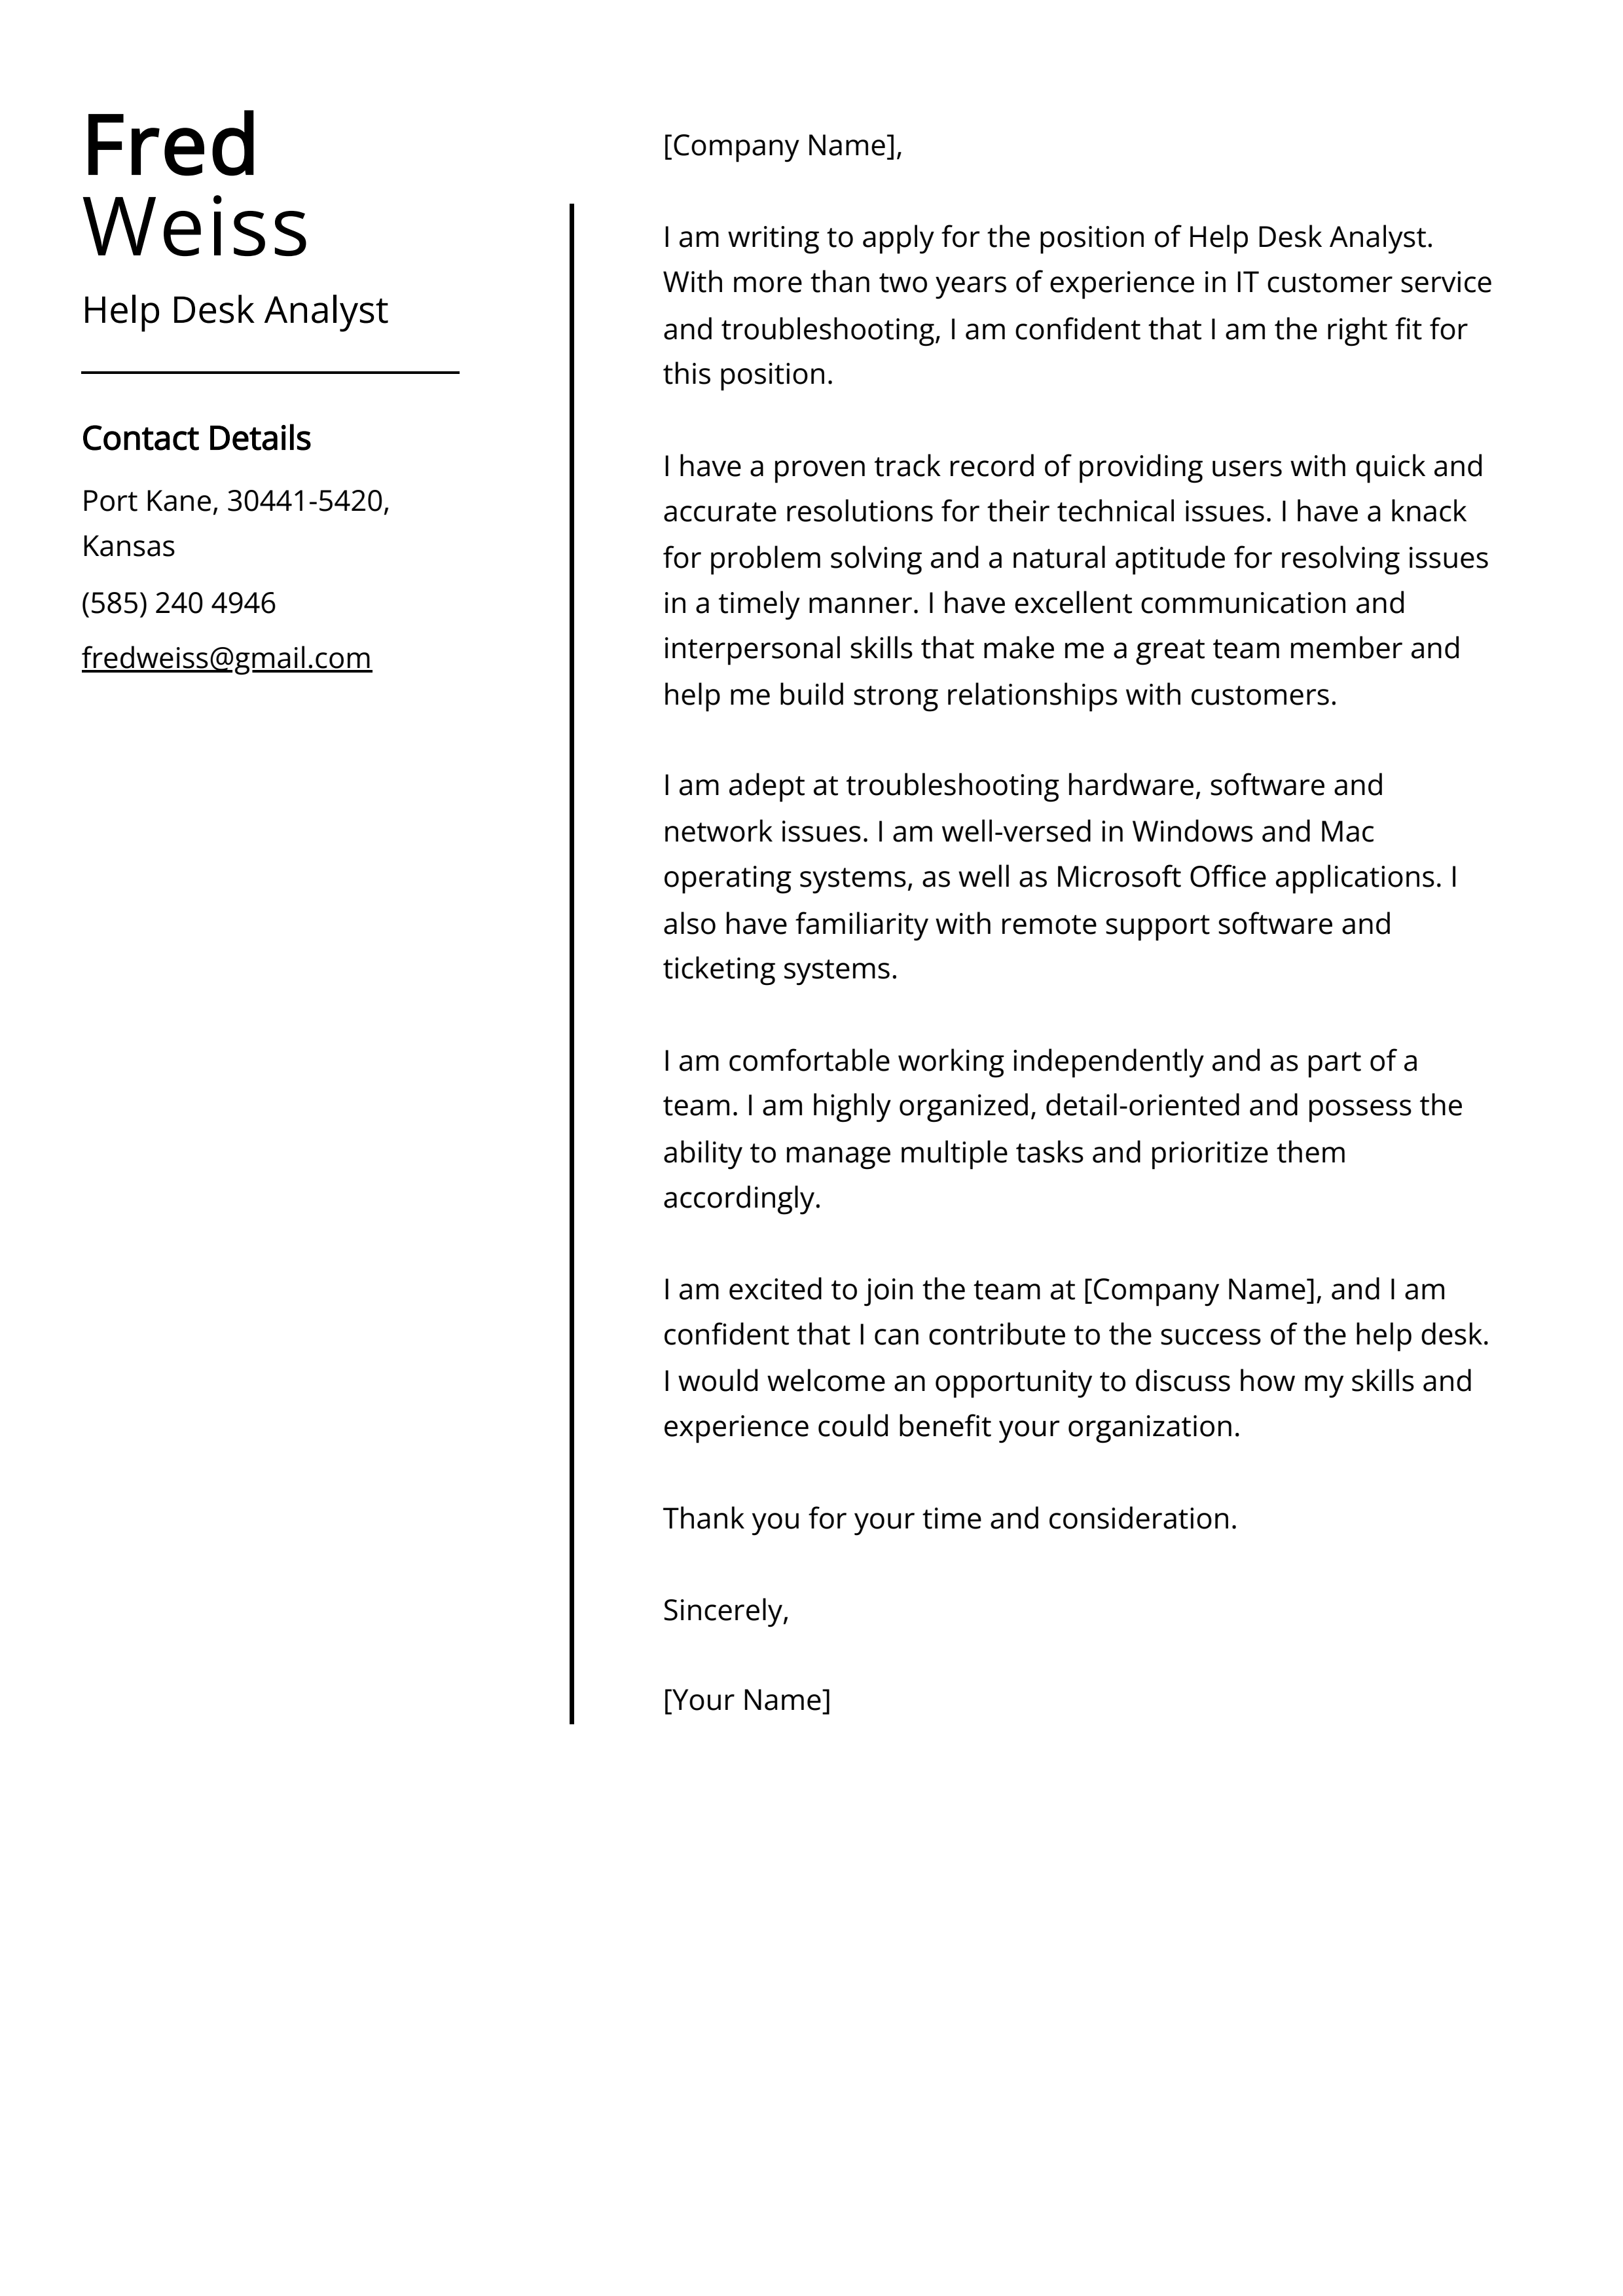 Help Desk Analyst Cover Letter Example